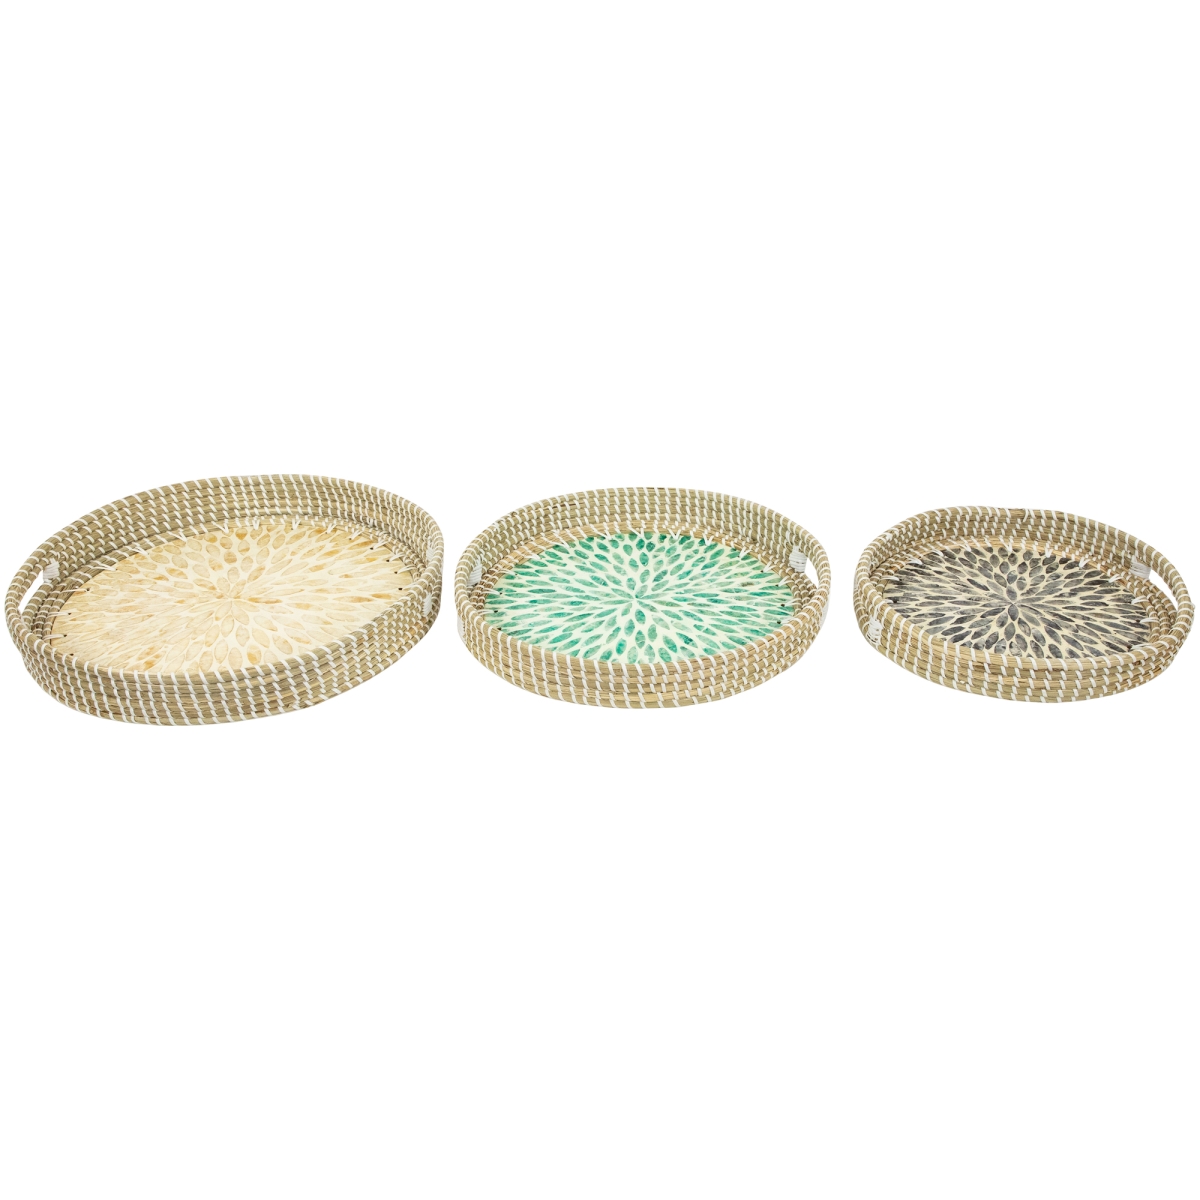 Picture of Northlight 35737384 15.75 in. Seagrass & Capiz Display Trays - Set of 3